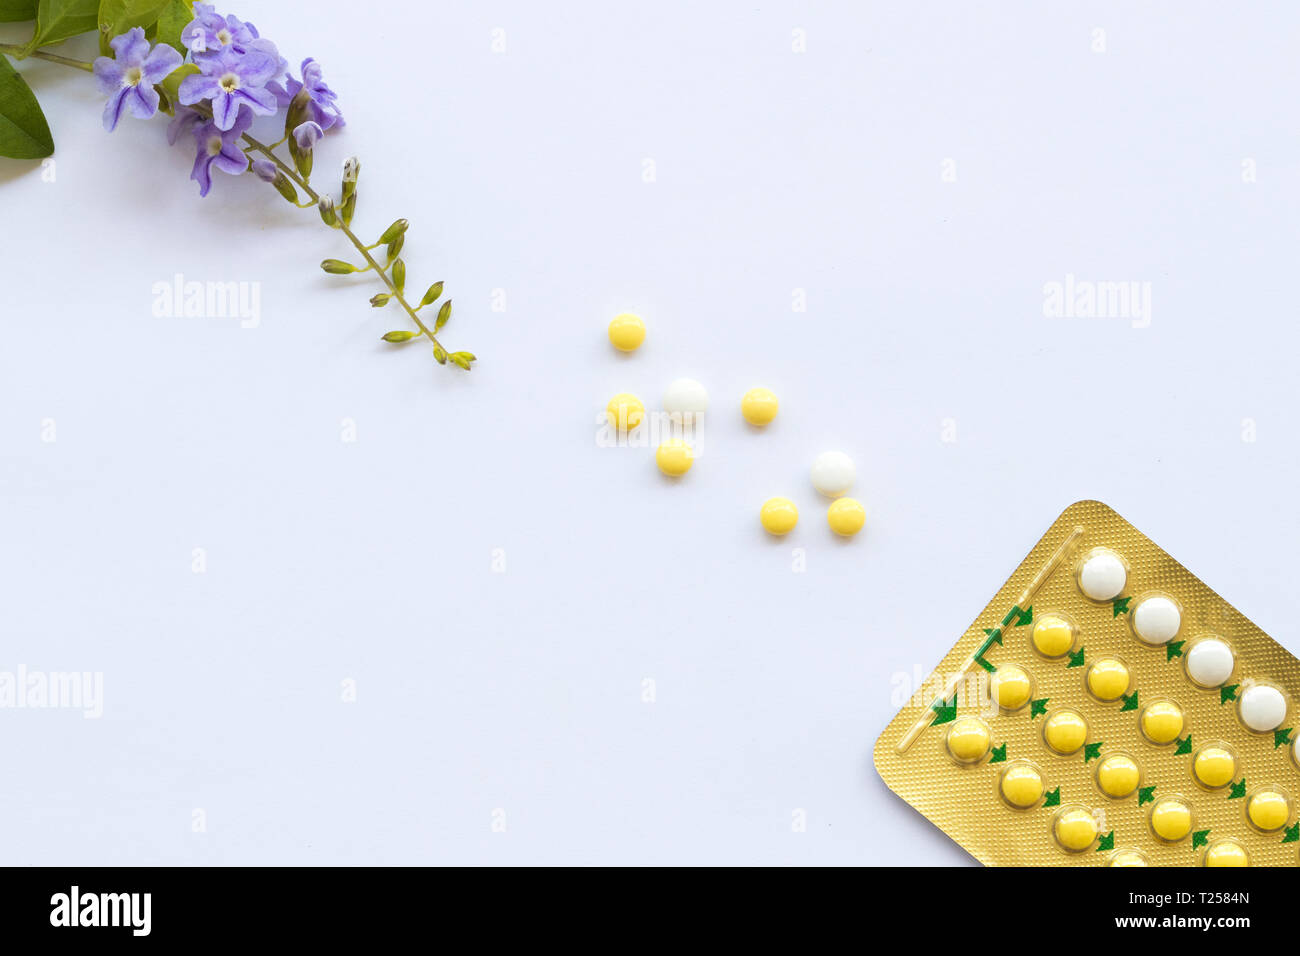 birth control pills of woman not want to have baby with purple flowers arrangement flat lay style on background white Stock Photo